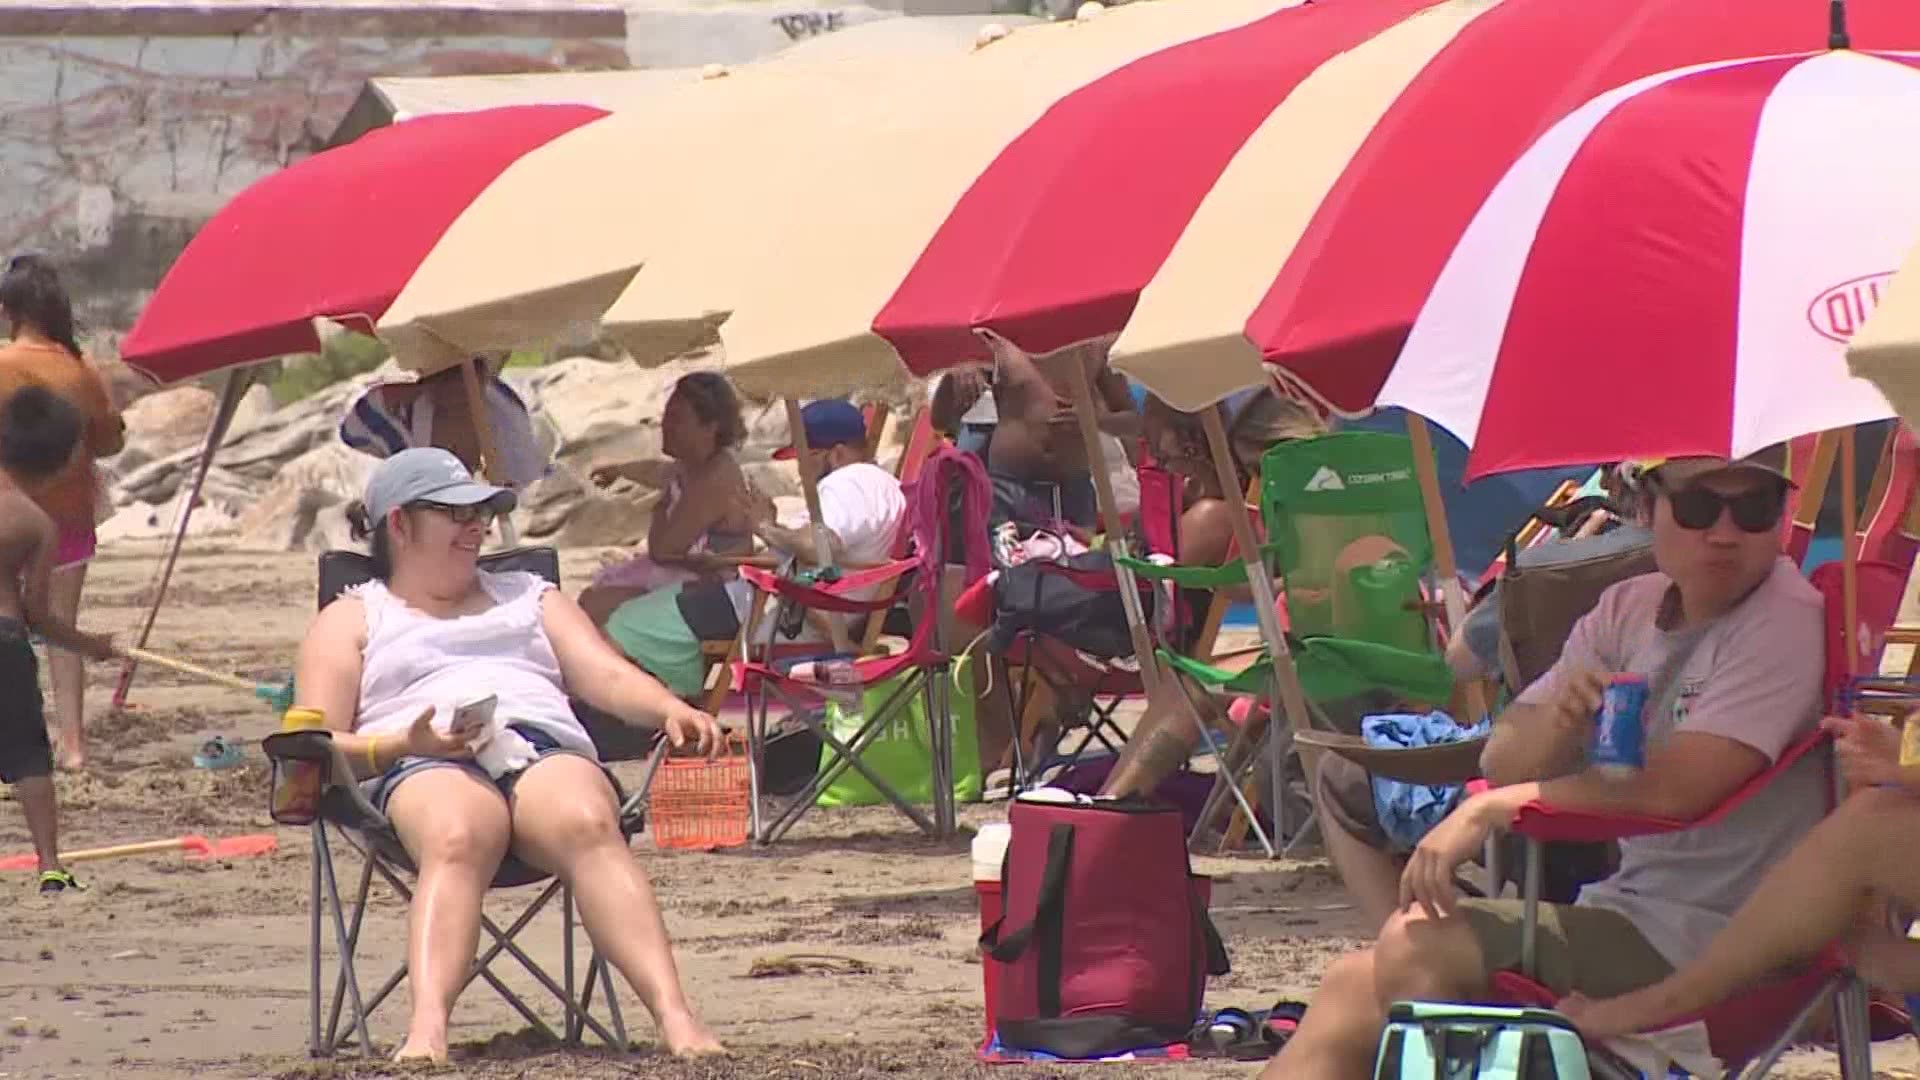 Memorial Day began with red flag warnings along Galveston beaches, but that didn't knock the wind out of anyone's sails.